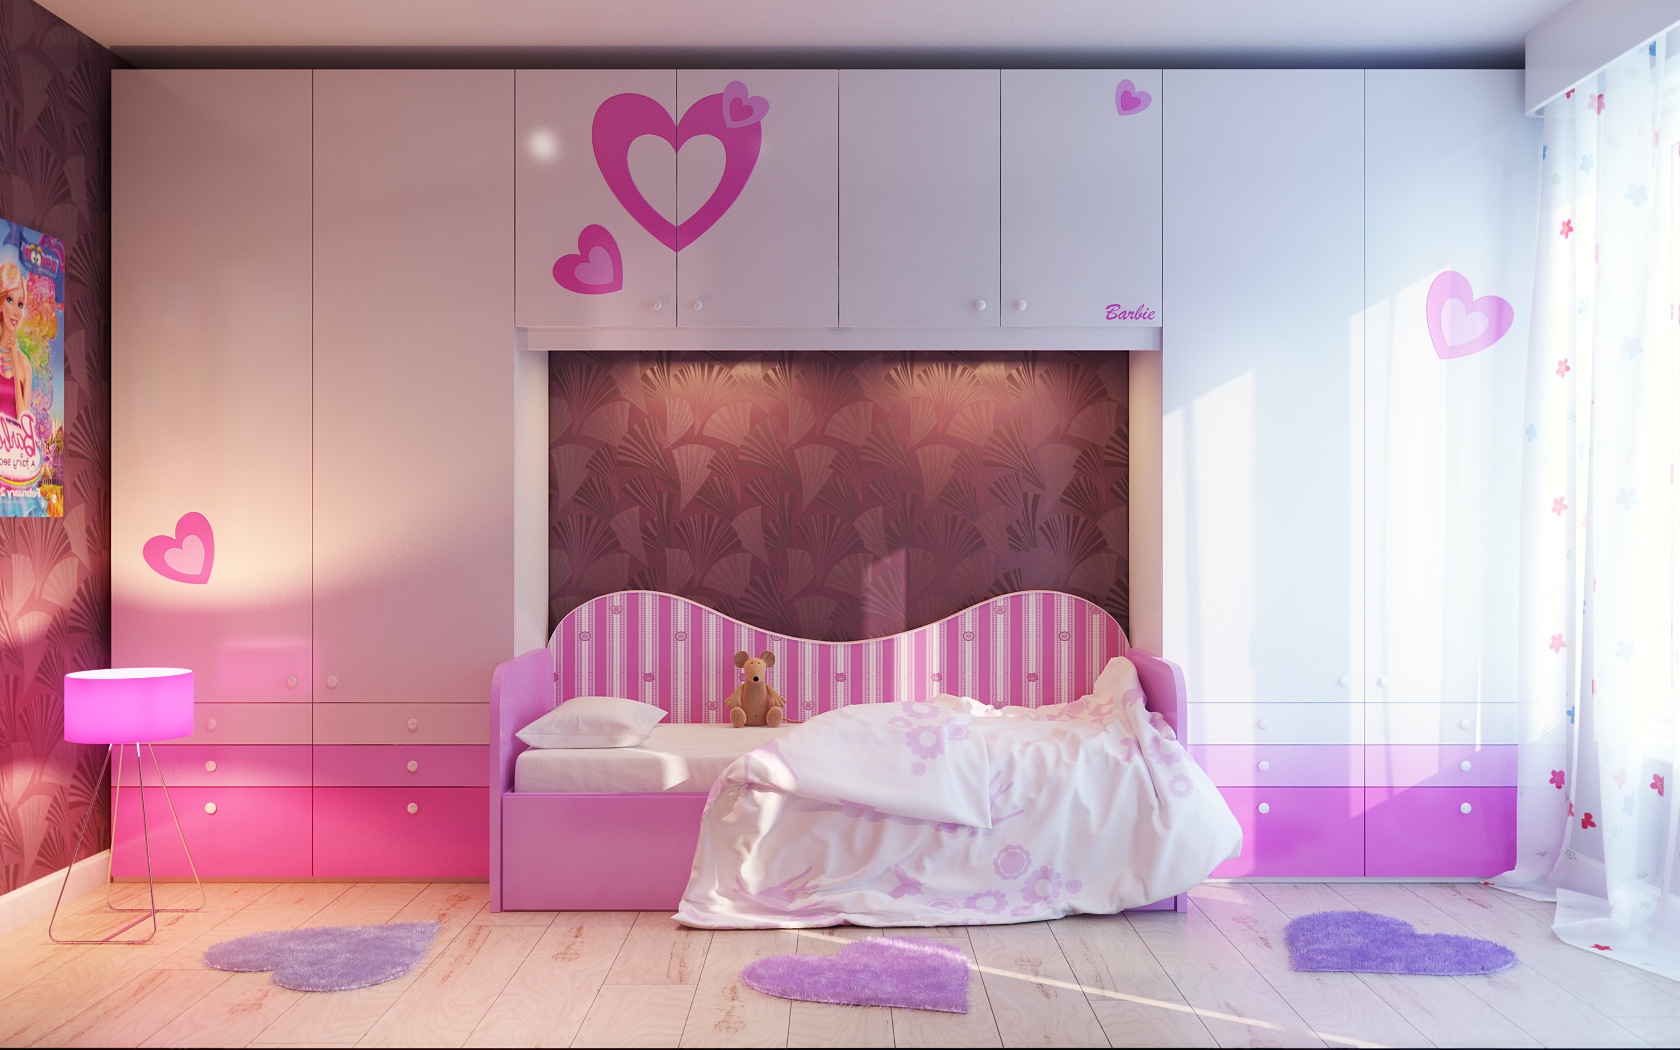 Via VladoMNA Barbie and heart themed room is at the pinnacle of girlie